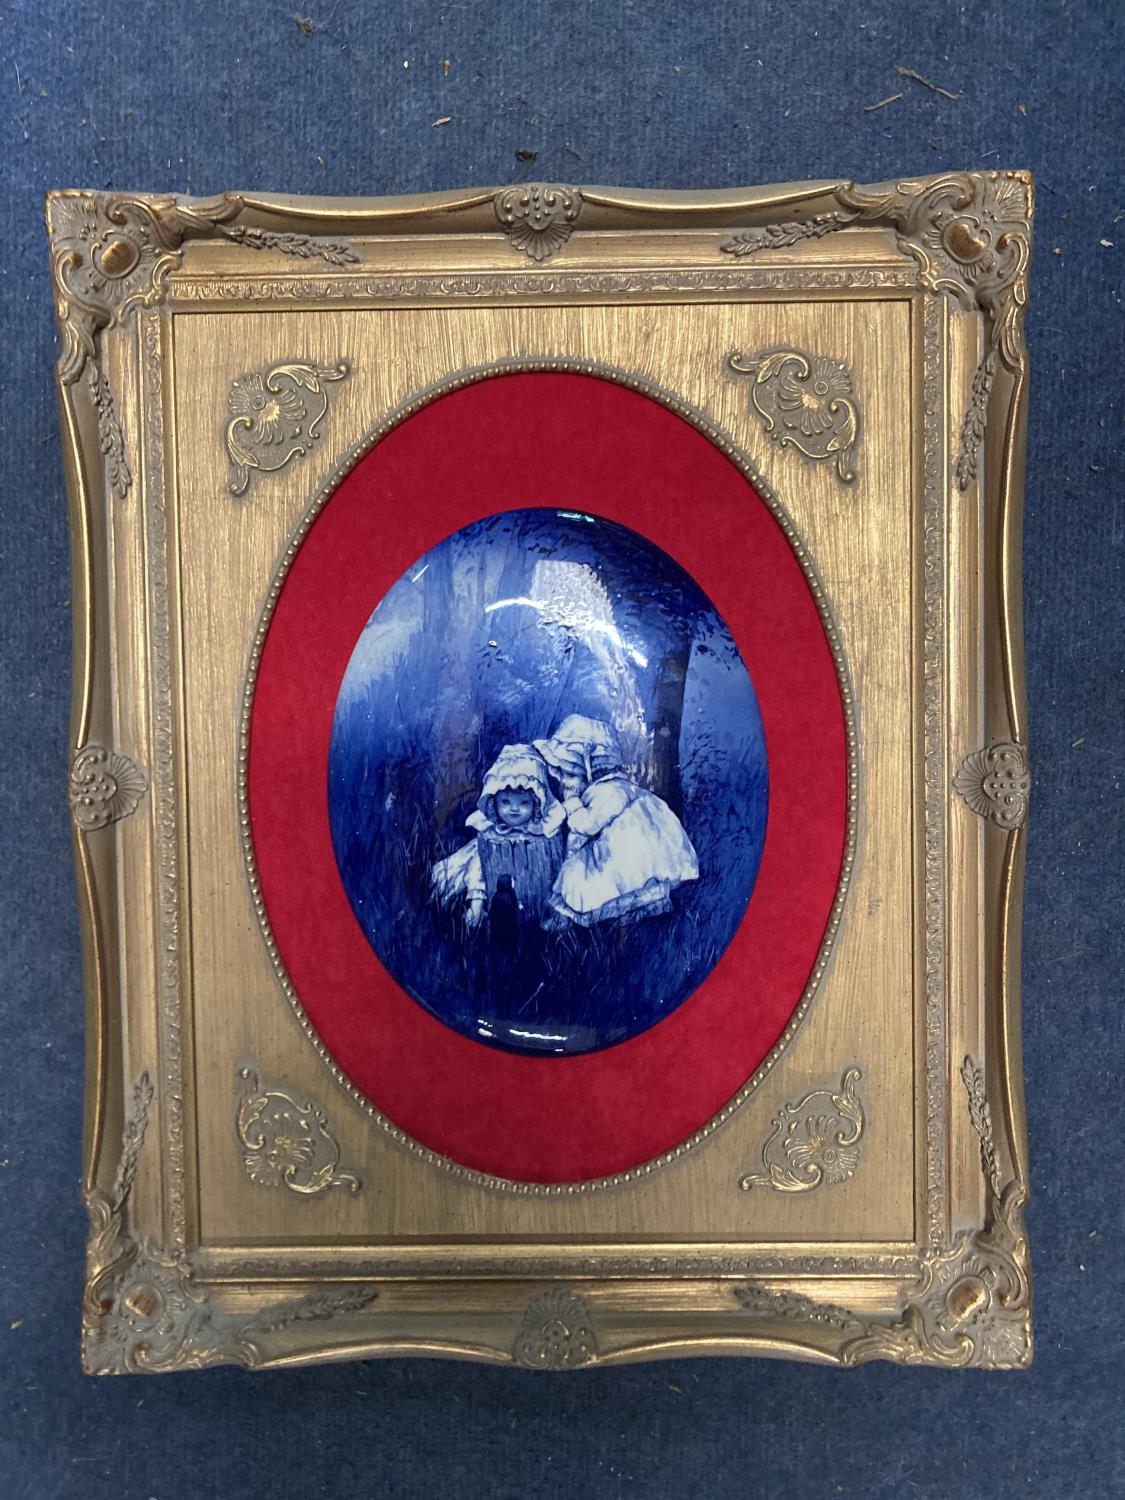 A CERAMIC PLAQUE OF BABES IN THE WOODS, IN AN ORNATE GILT FRAME, 43CM X 54CM